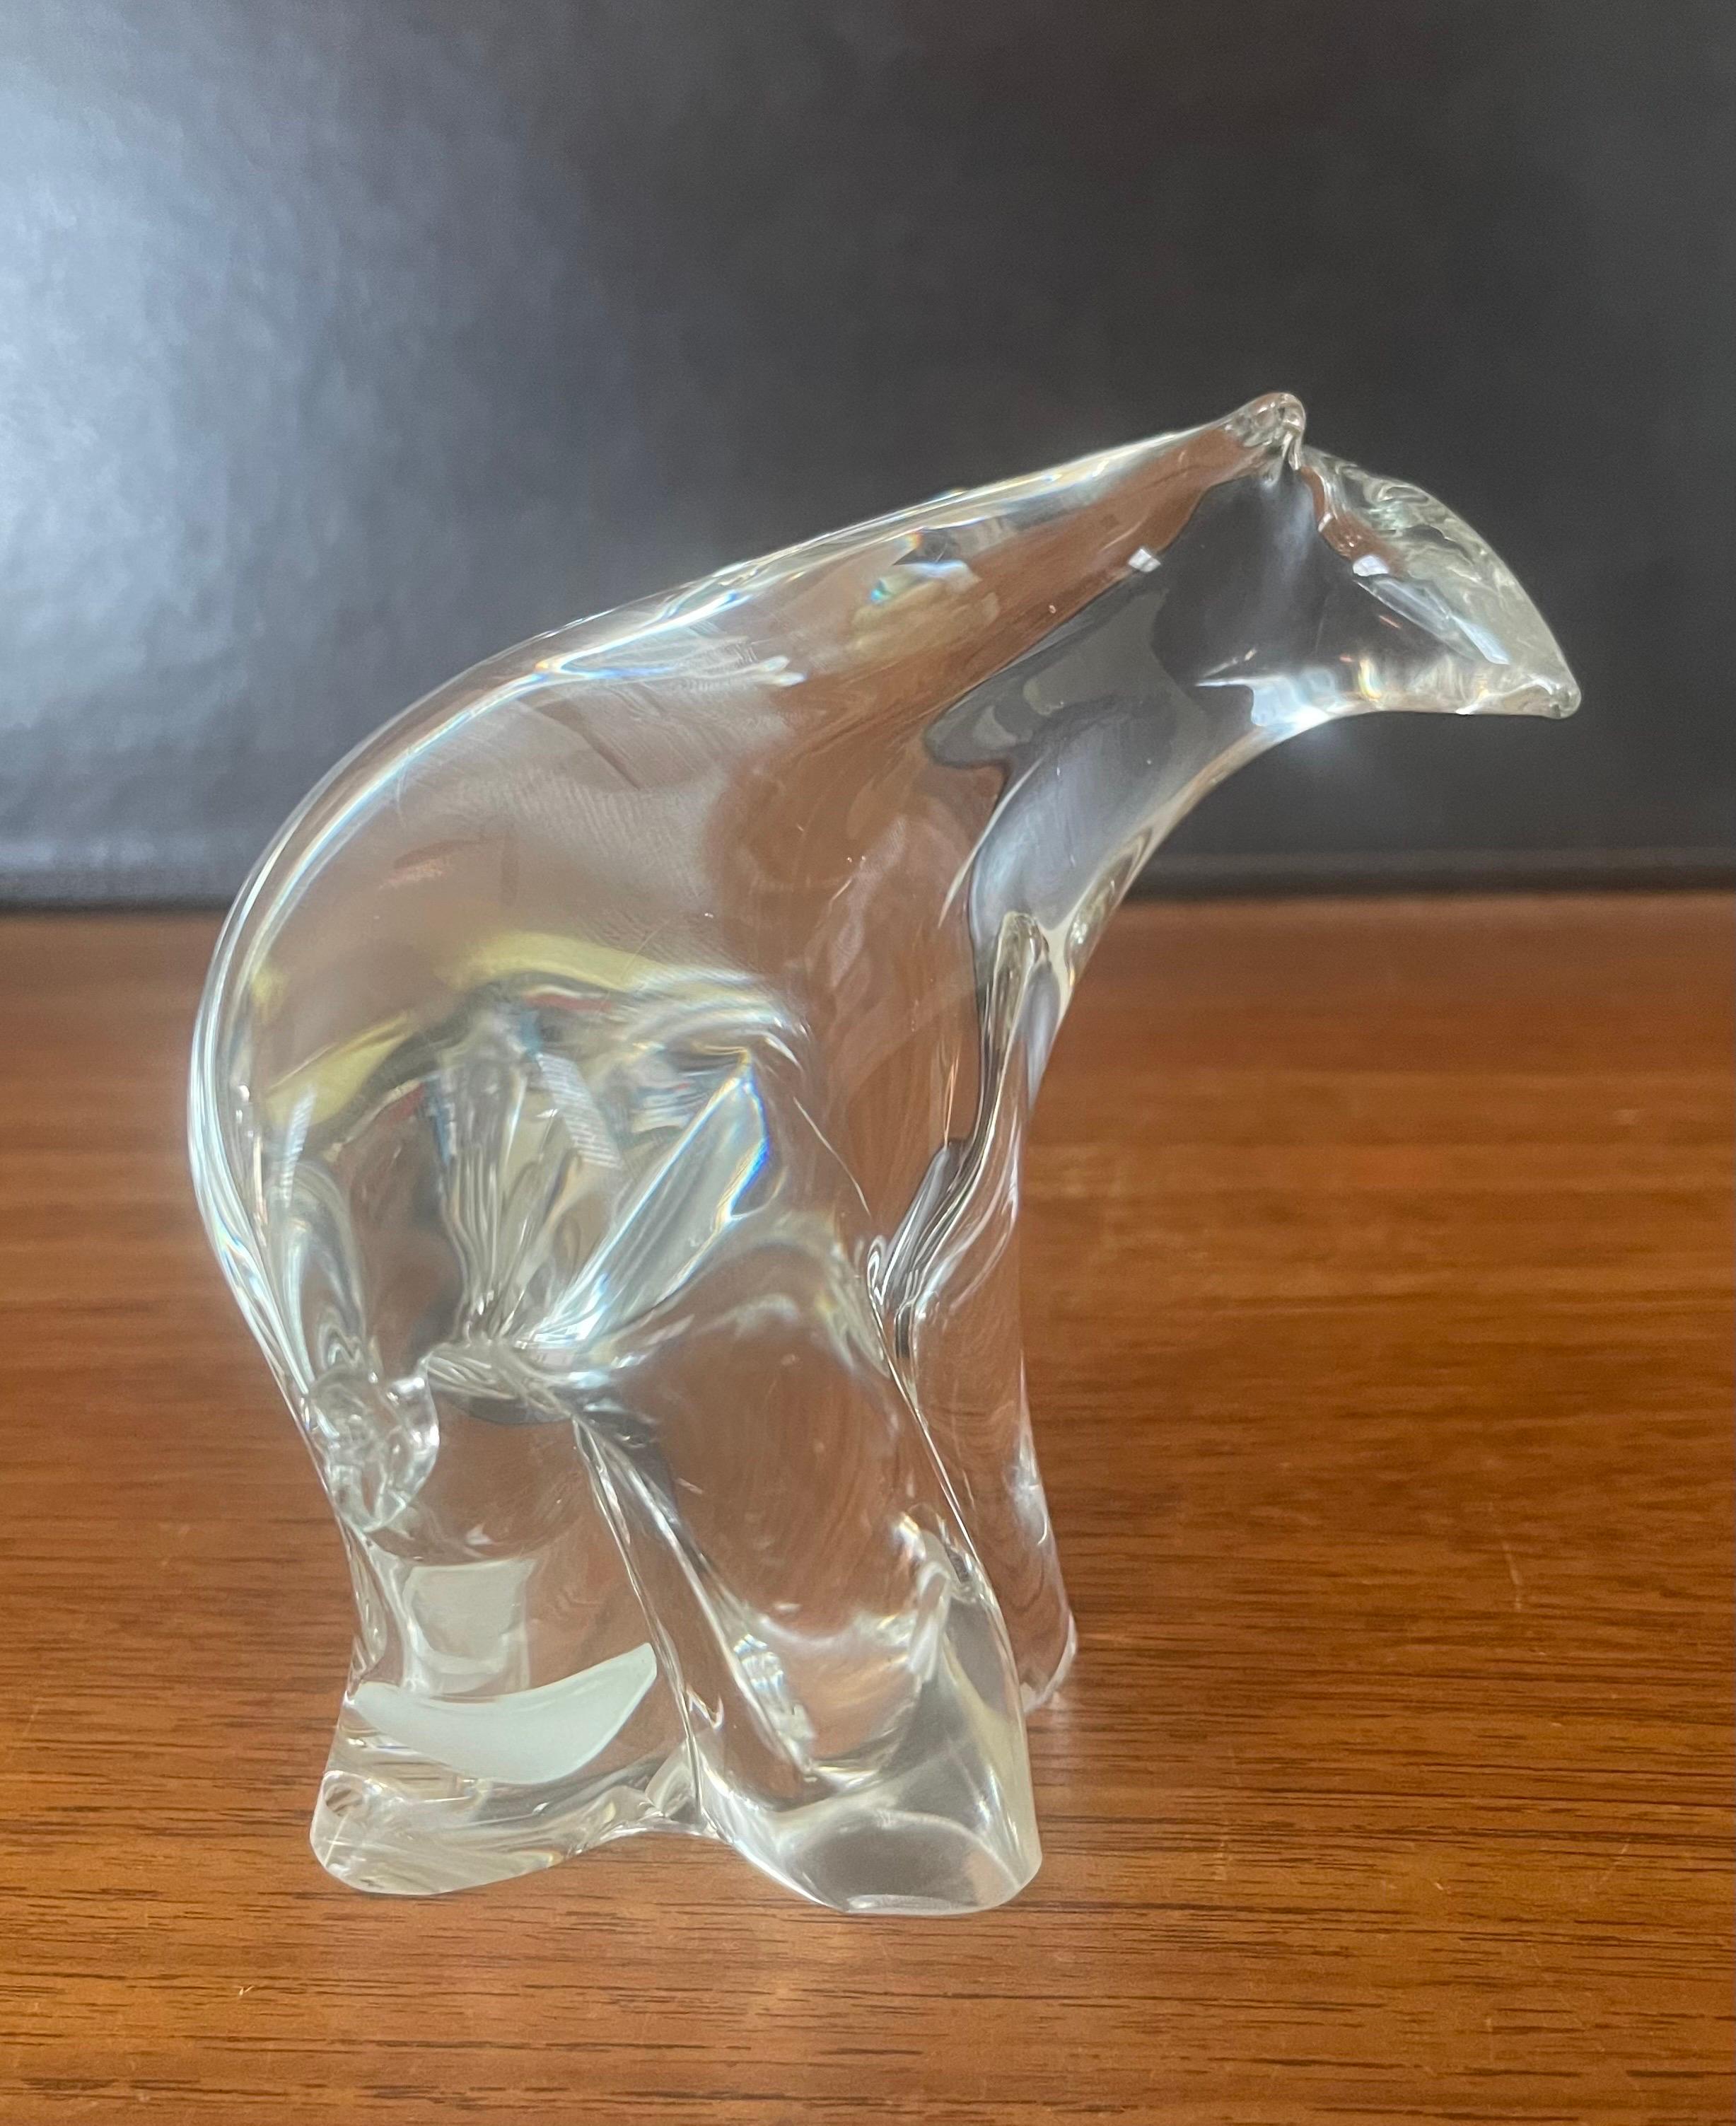 A very cool modernist art glass polar bear sculpture, circa 1970s. The piece is in very good vintage condition with no chips or cracks and measures a 6